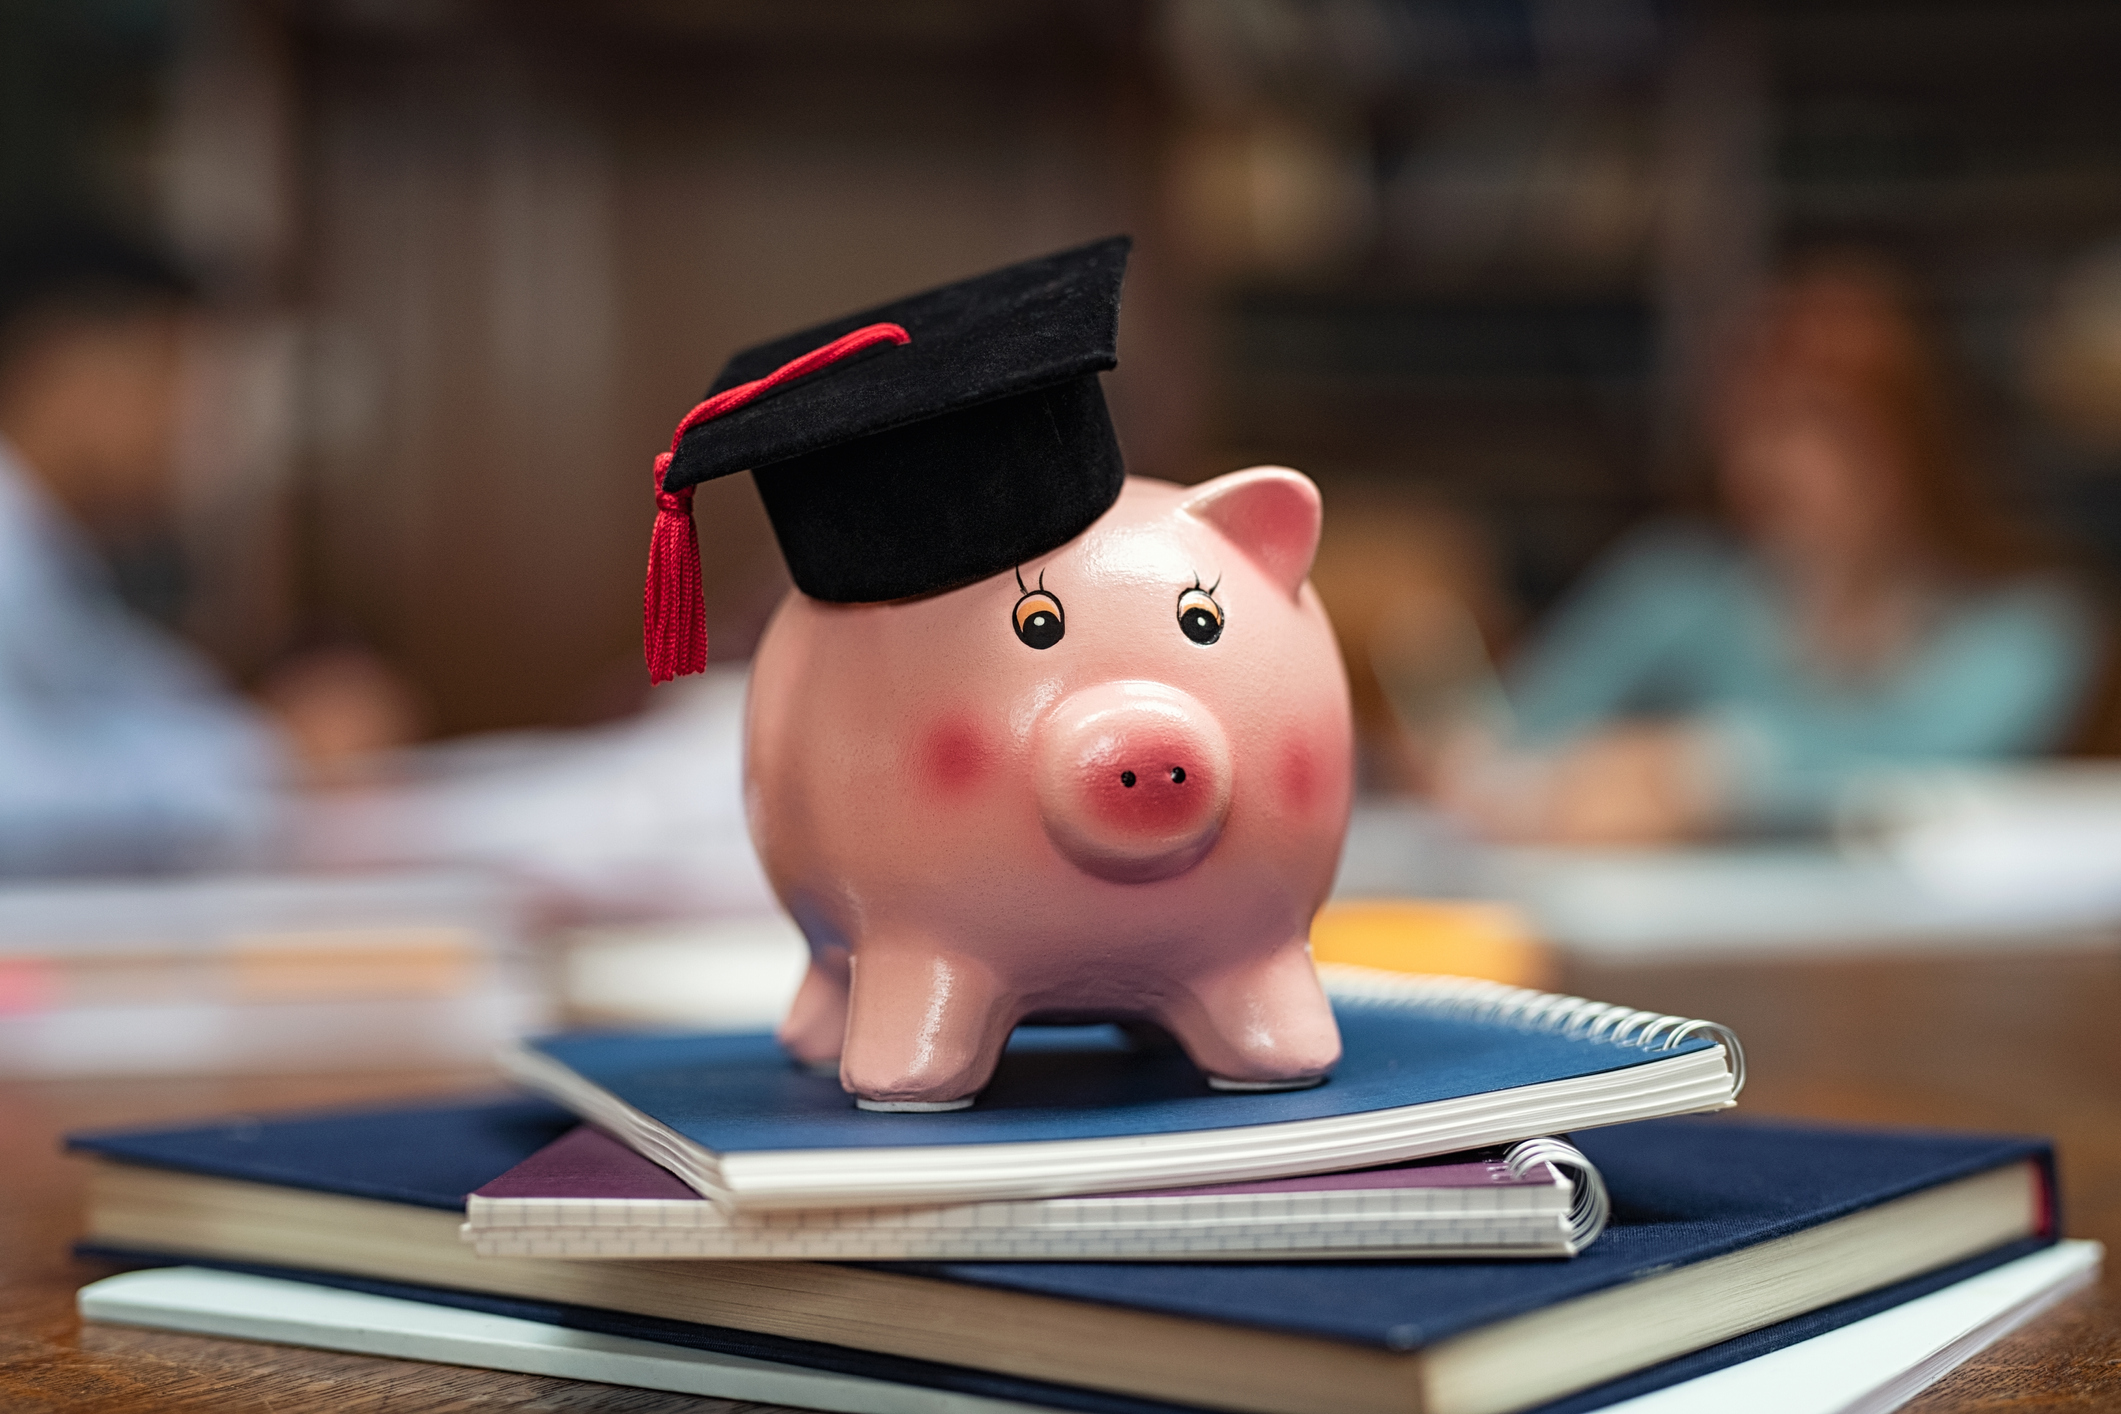 Piggy bank wearing mortar board on pile of books in library while students studying in background. Saving money for college with piggy bank on books in library. Savings and education debt concept. Student loan